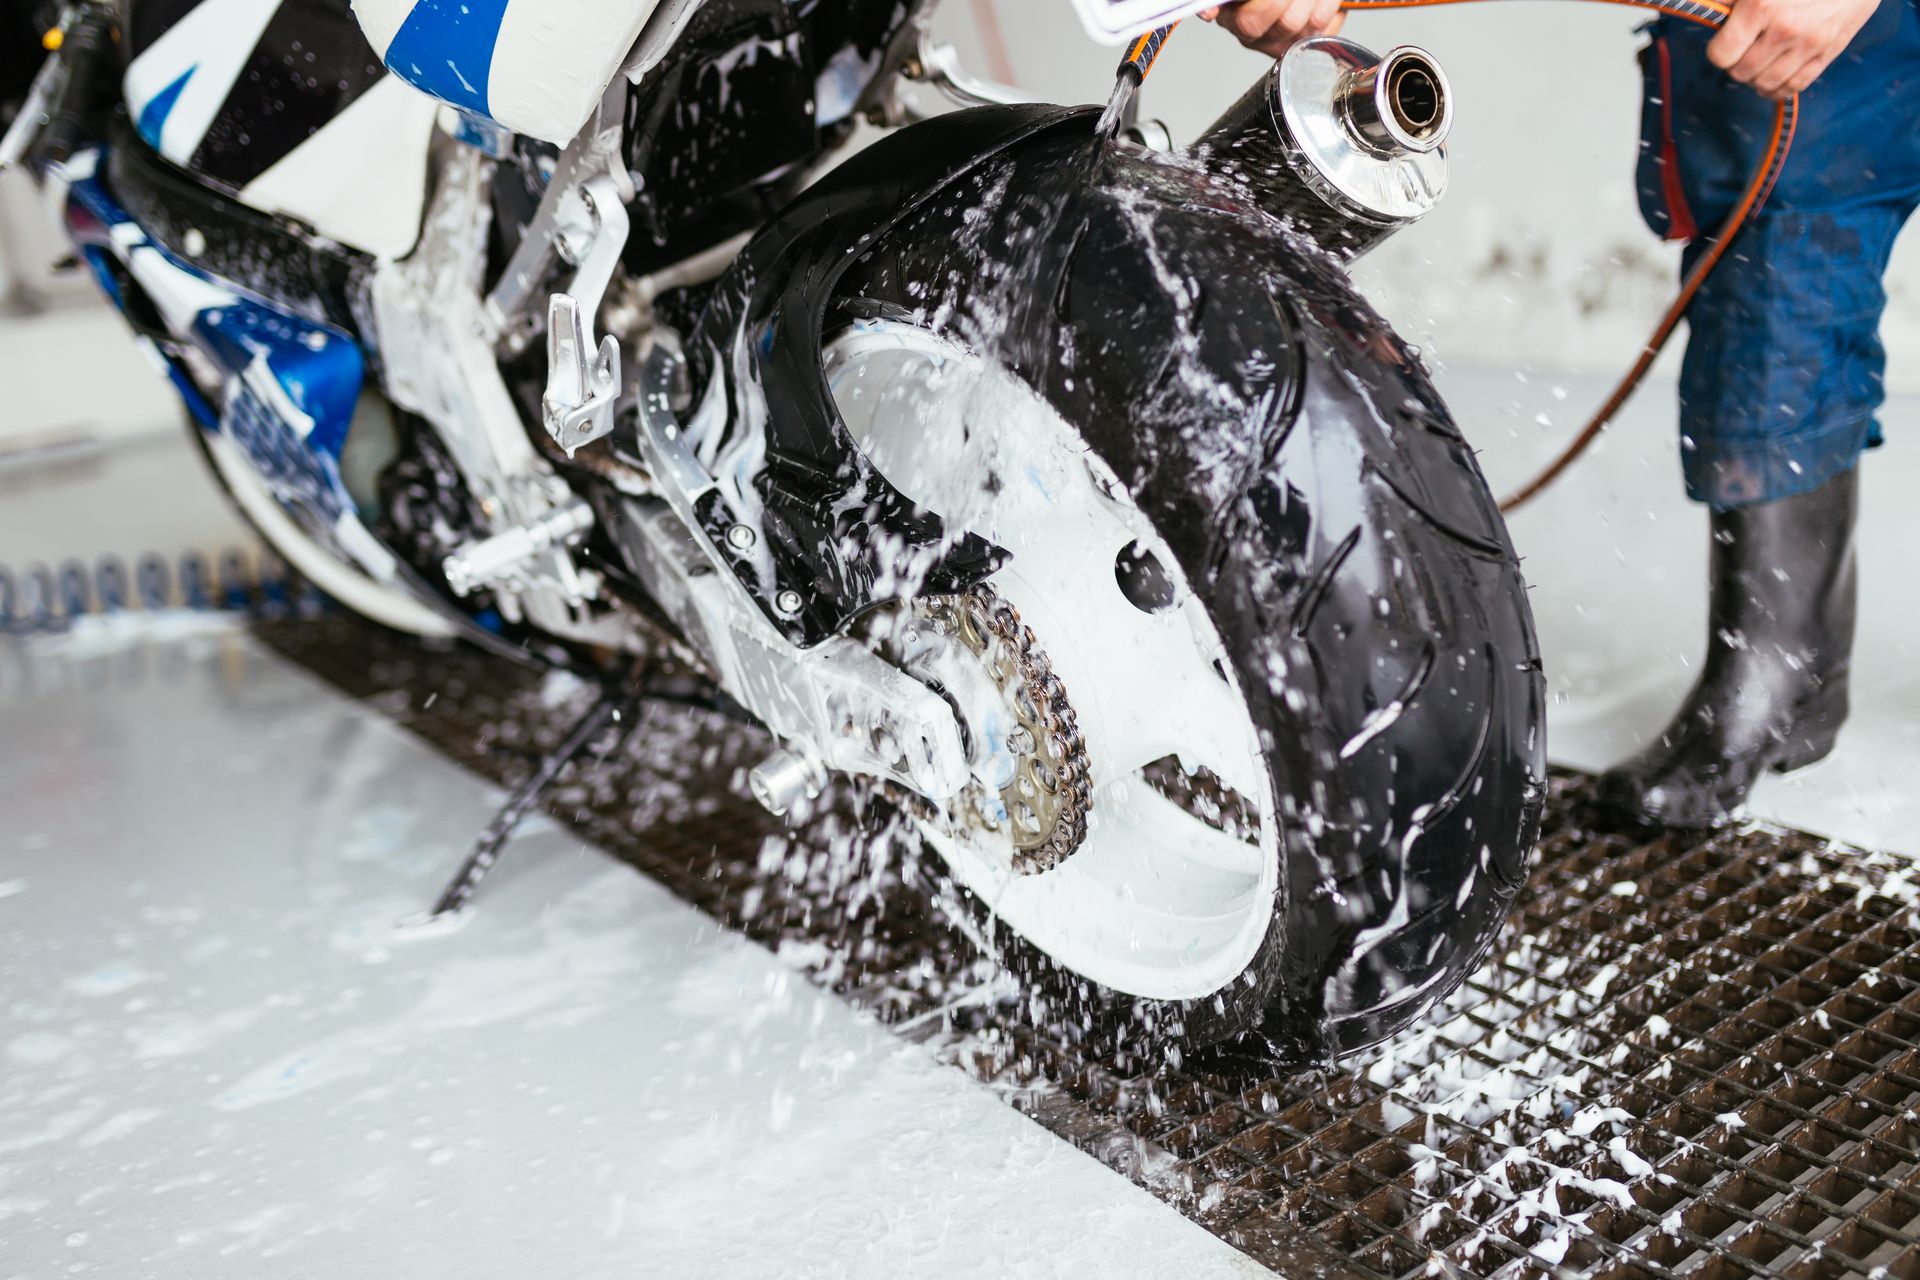 a person is washing a motorcycle with soap and water .